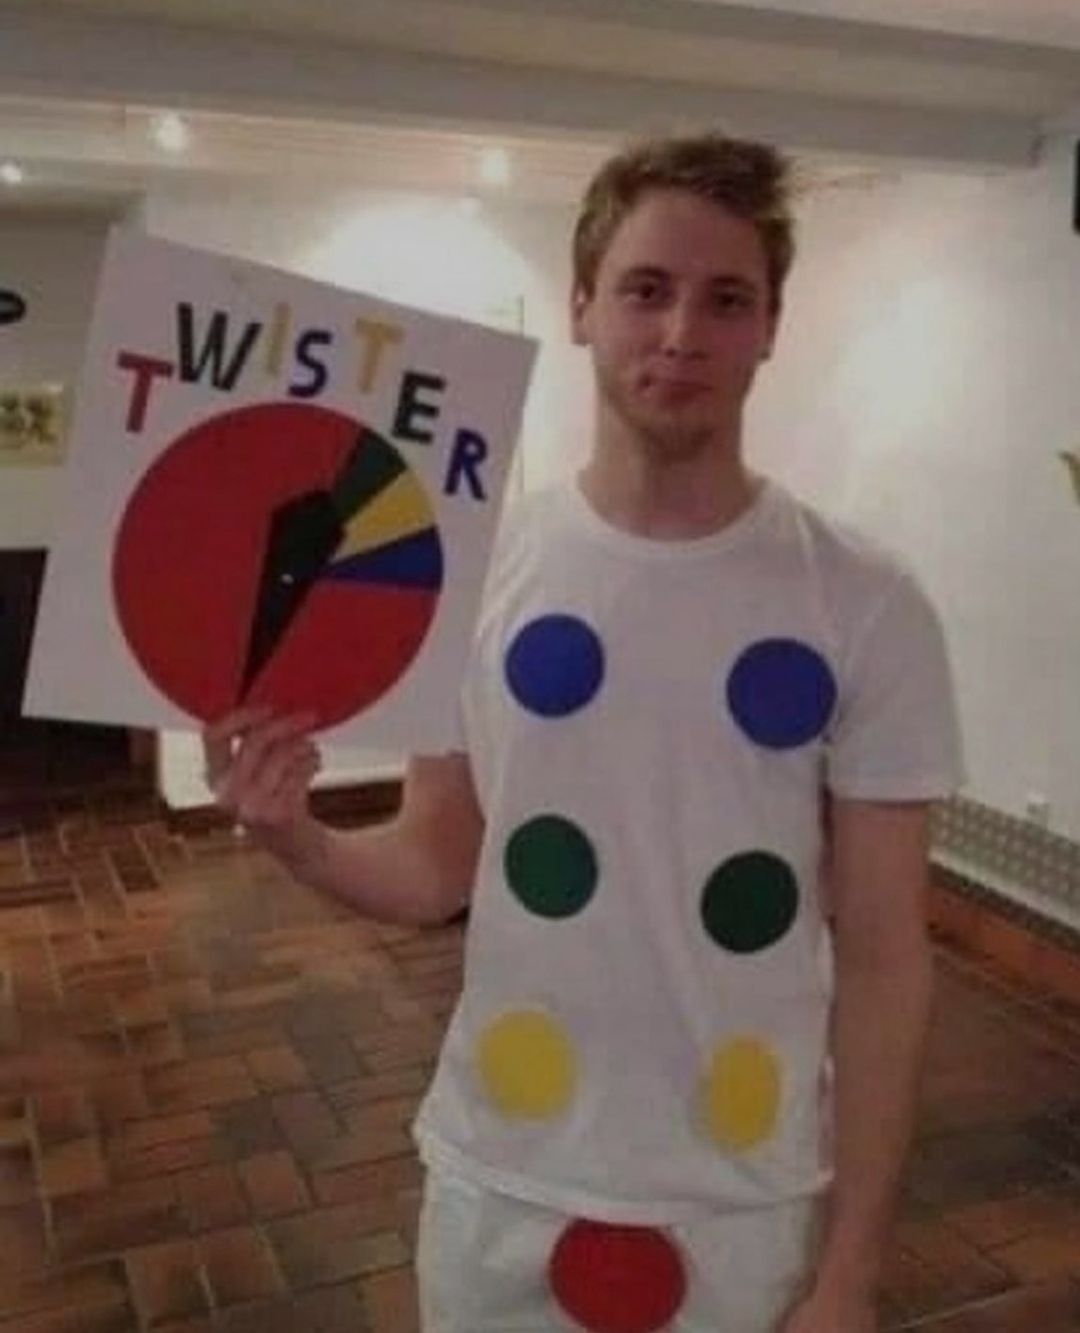 Me playing twister with your mom